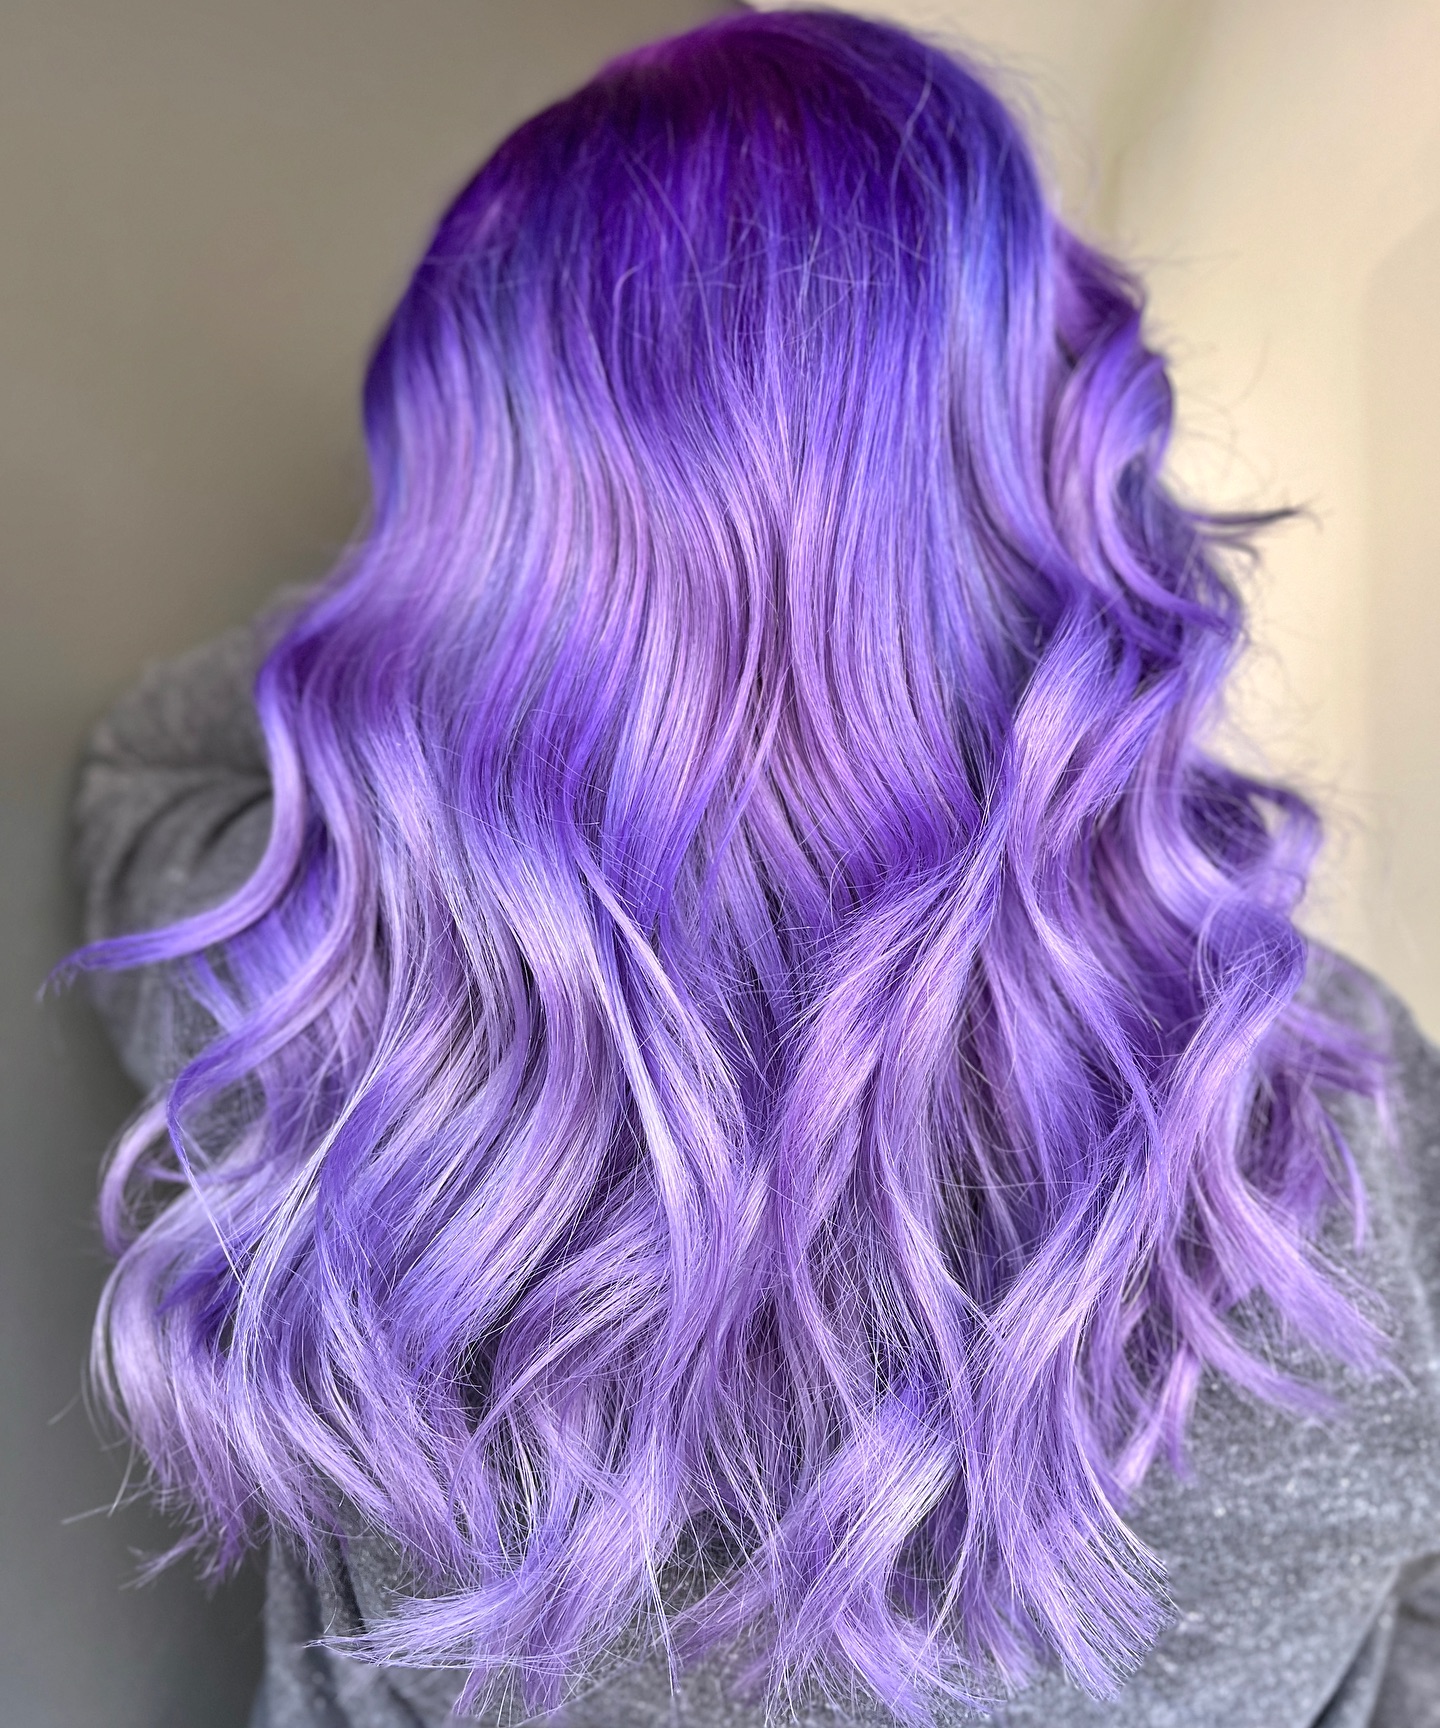 Bright Lavender Color on Long Wavy Hair